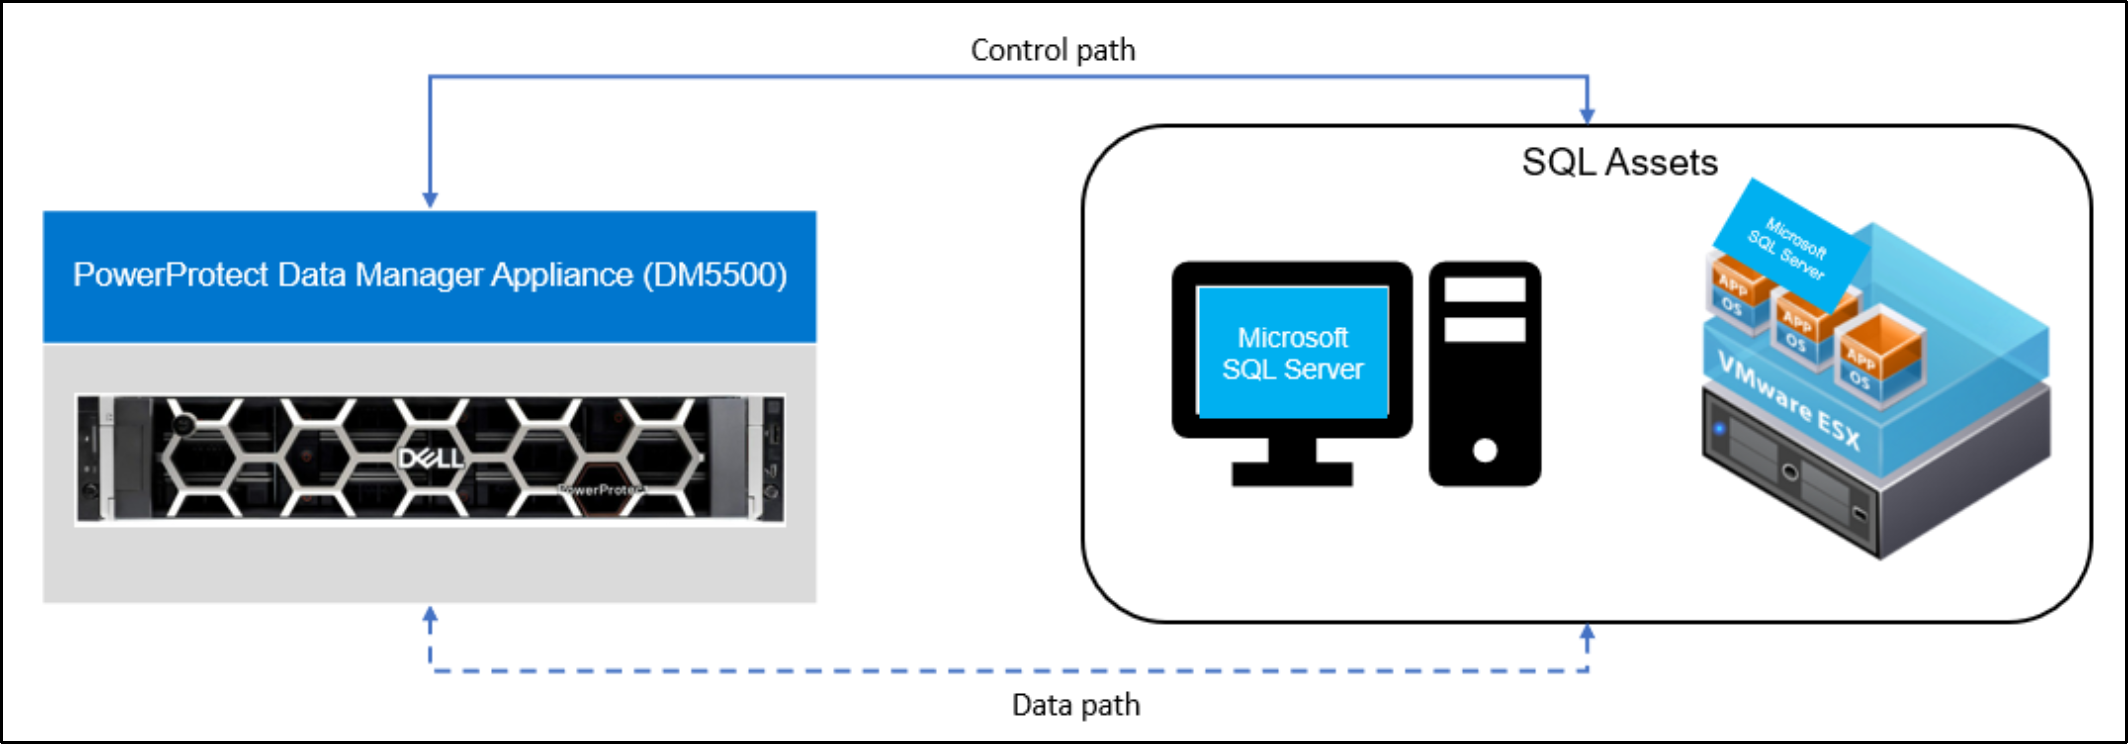 The image shows SQL server database protection with the Data Manager Appliance